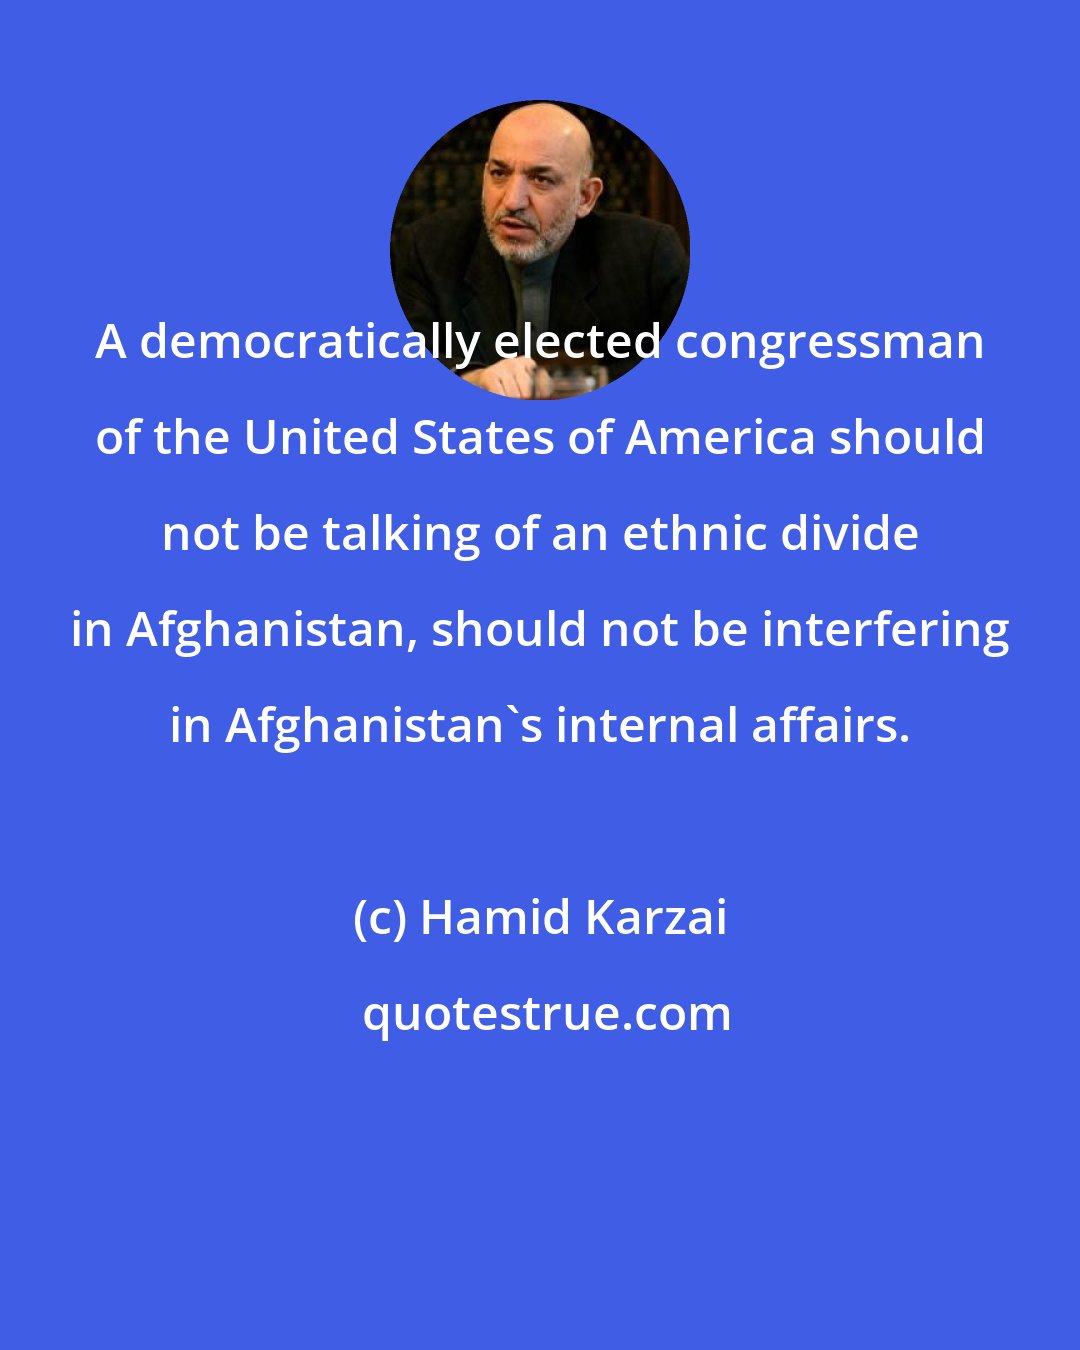 Hamid Karzai: A democratically elected congressman of the United States of America should not be talking of an ethnic divide in Afghanistan, should not be interfering in Afghanistan's internal affairs.